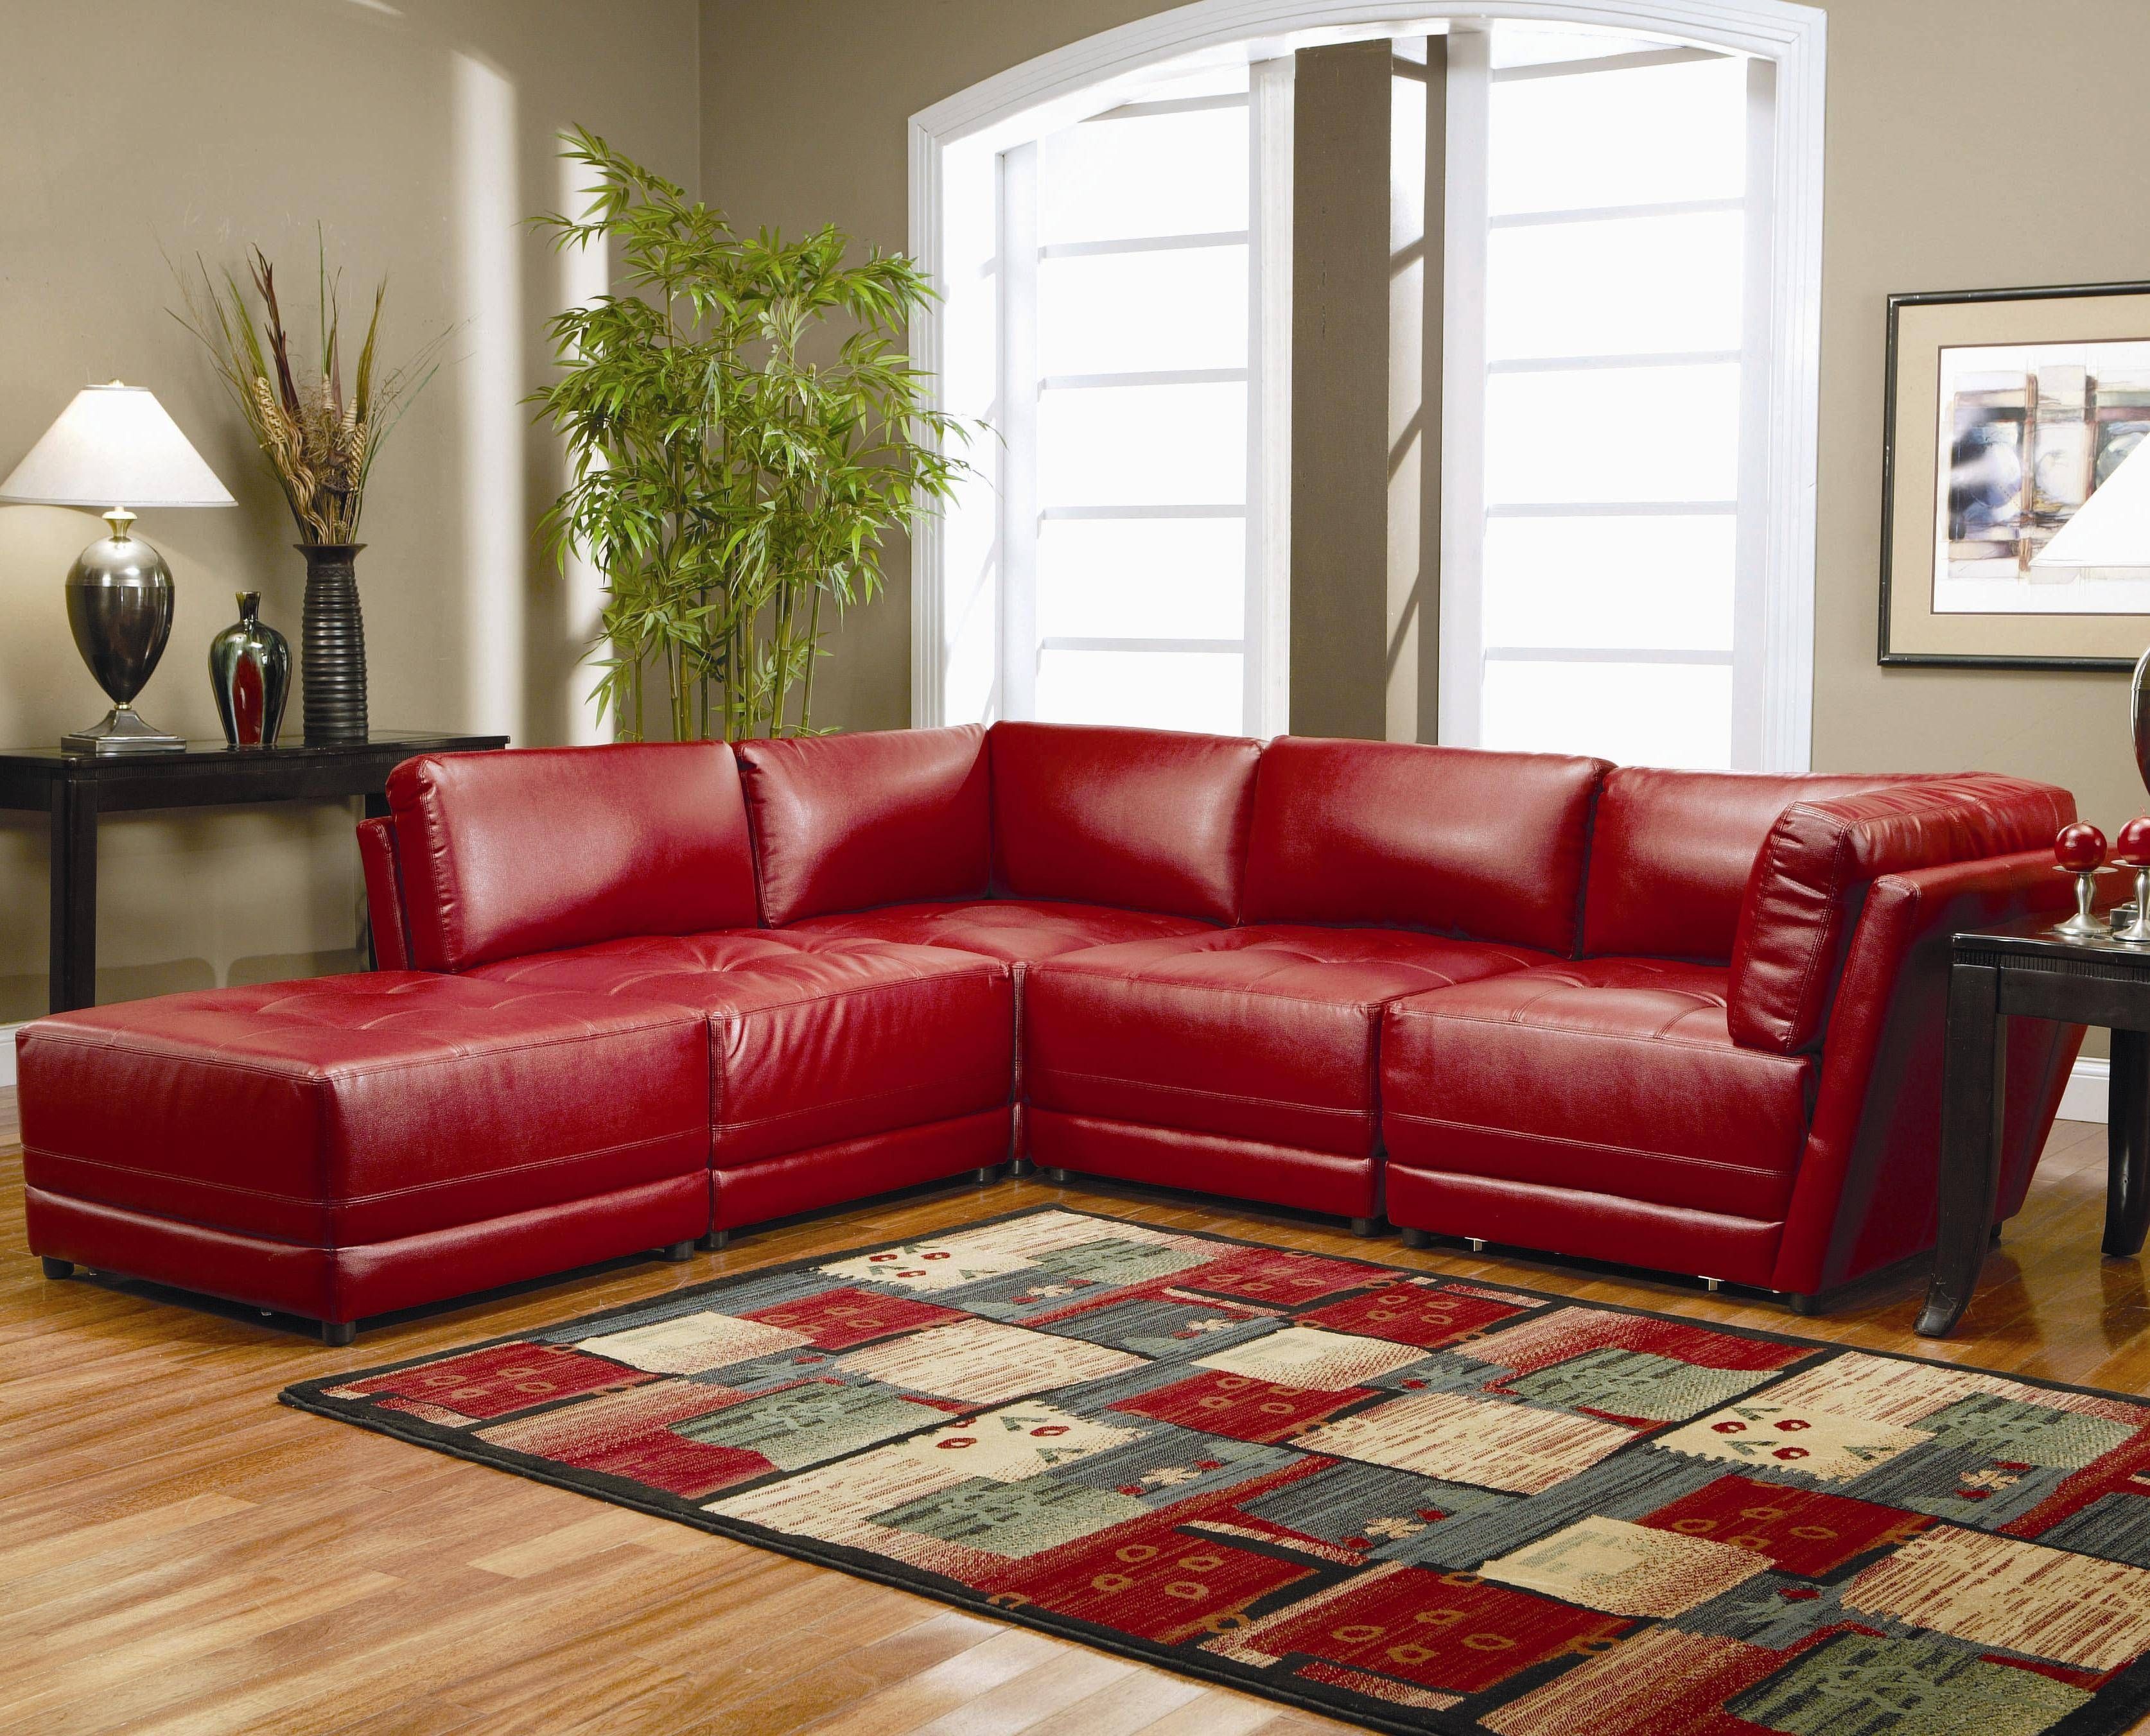 Beautiful Leather Sofa For Small Living Room With Leather Sofa In Inside Dark Red Leather Couches (View 7 of 15)